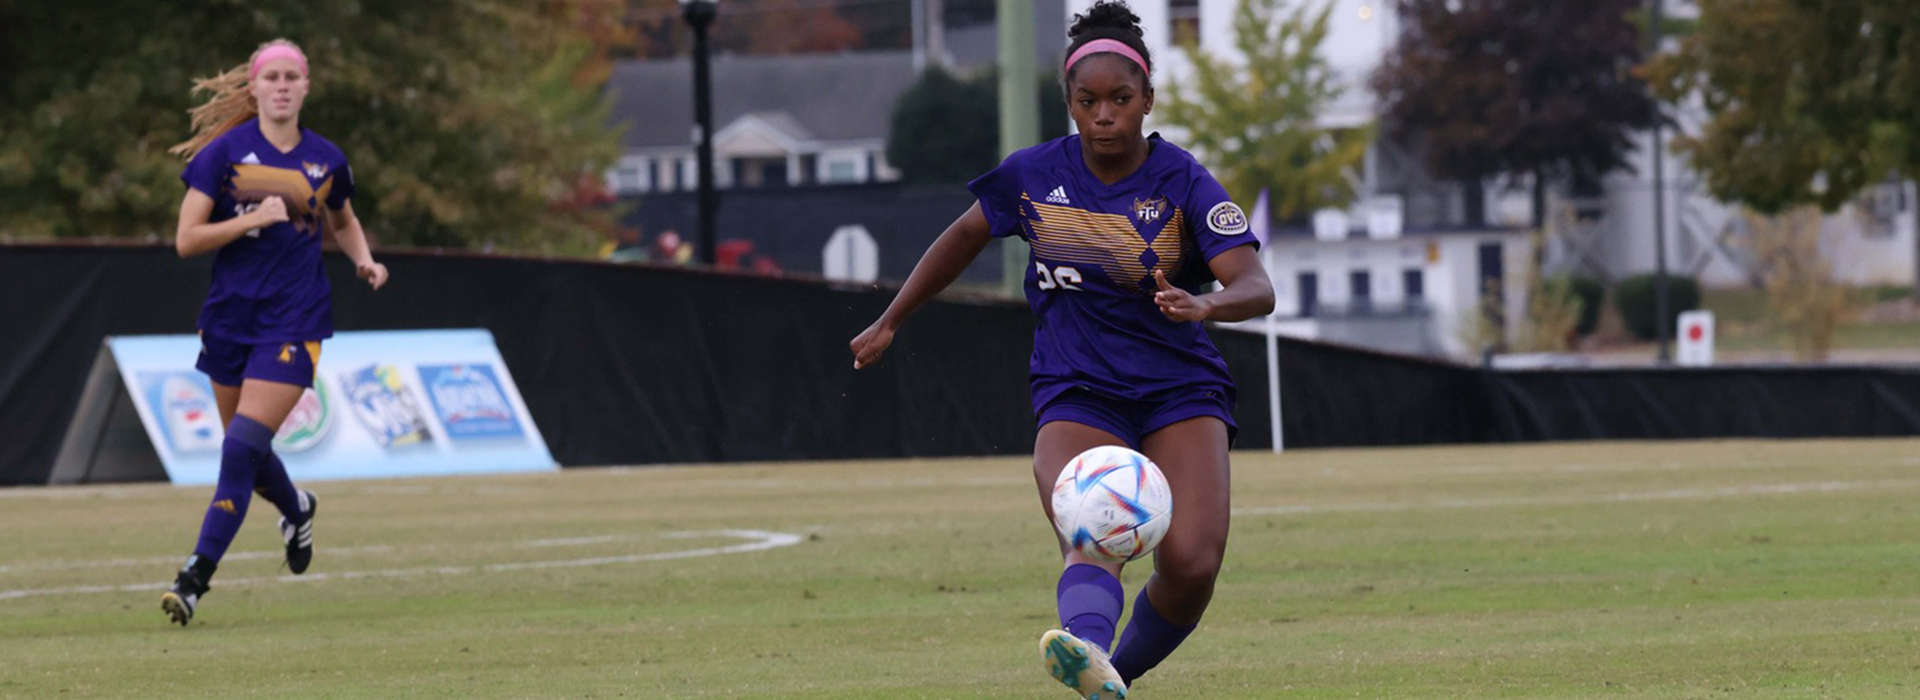 Tech takes 2-2 tie at Little Rock to claim title outright, cap off OVC’s first undefeated season since 2018